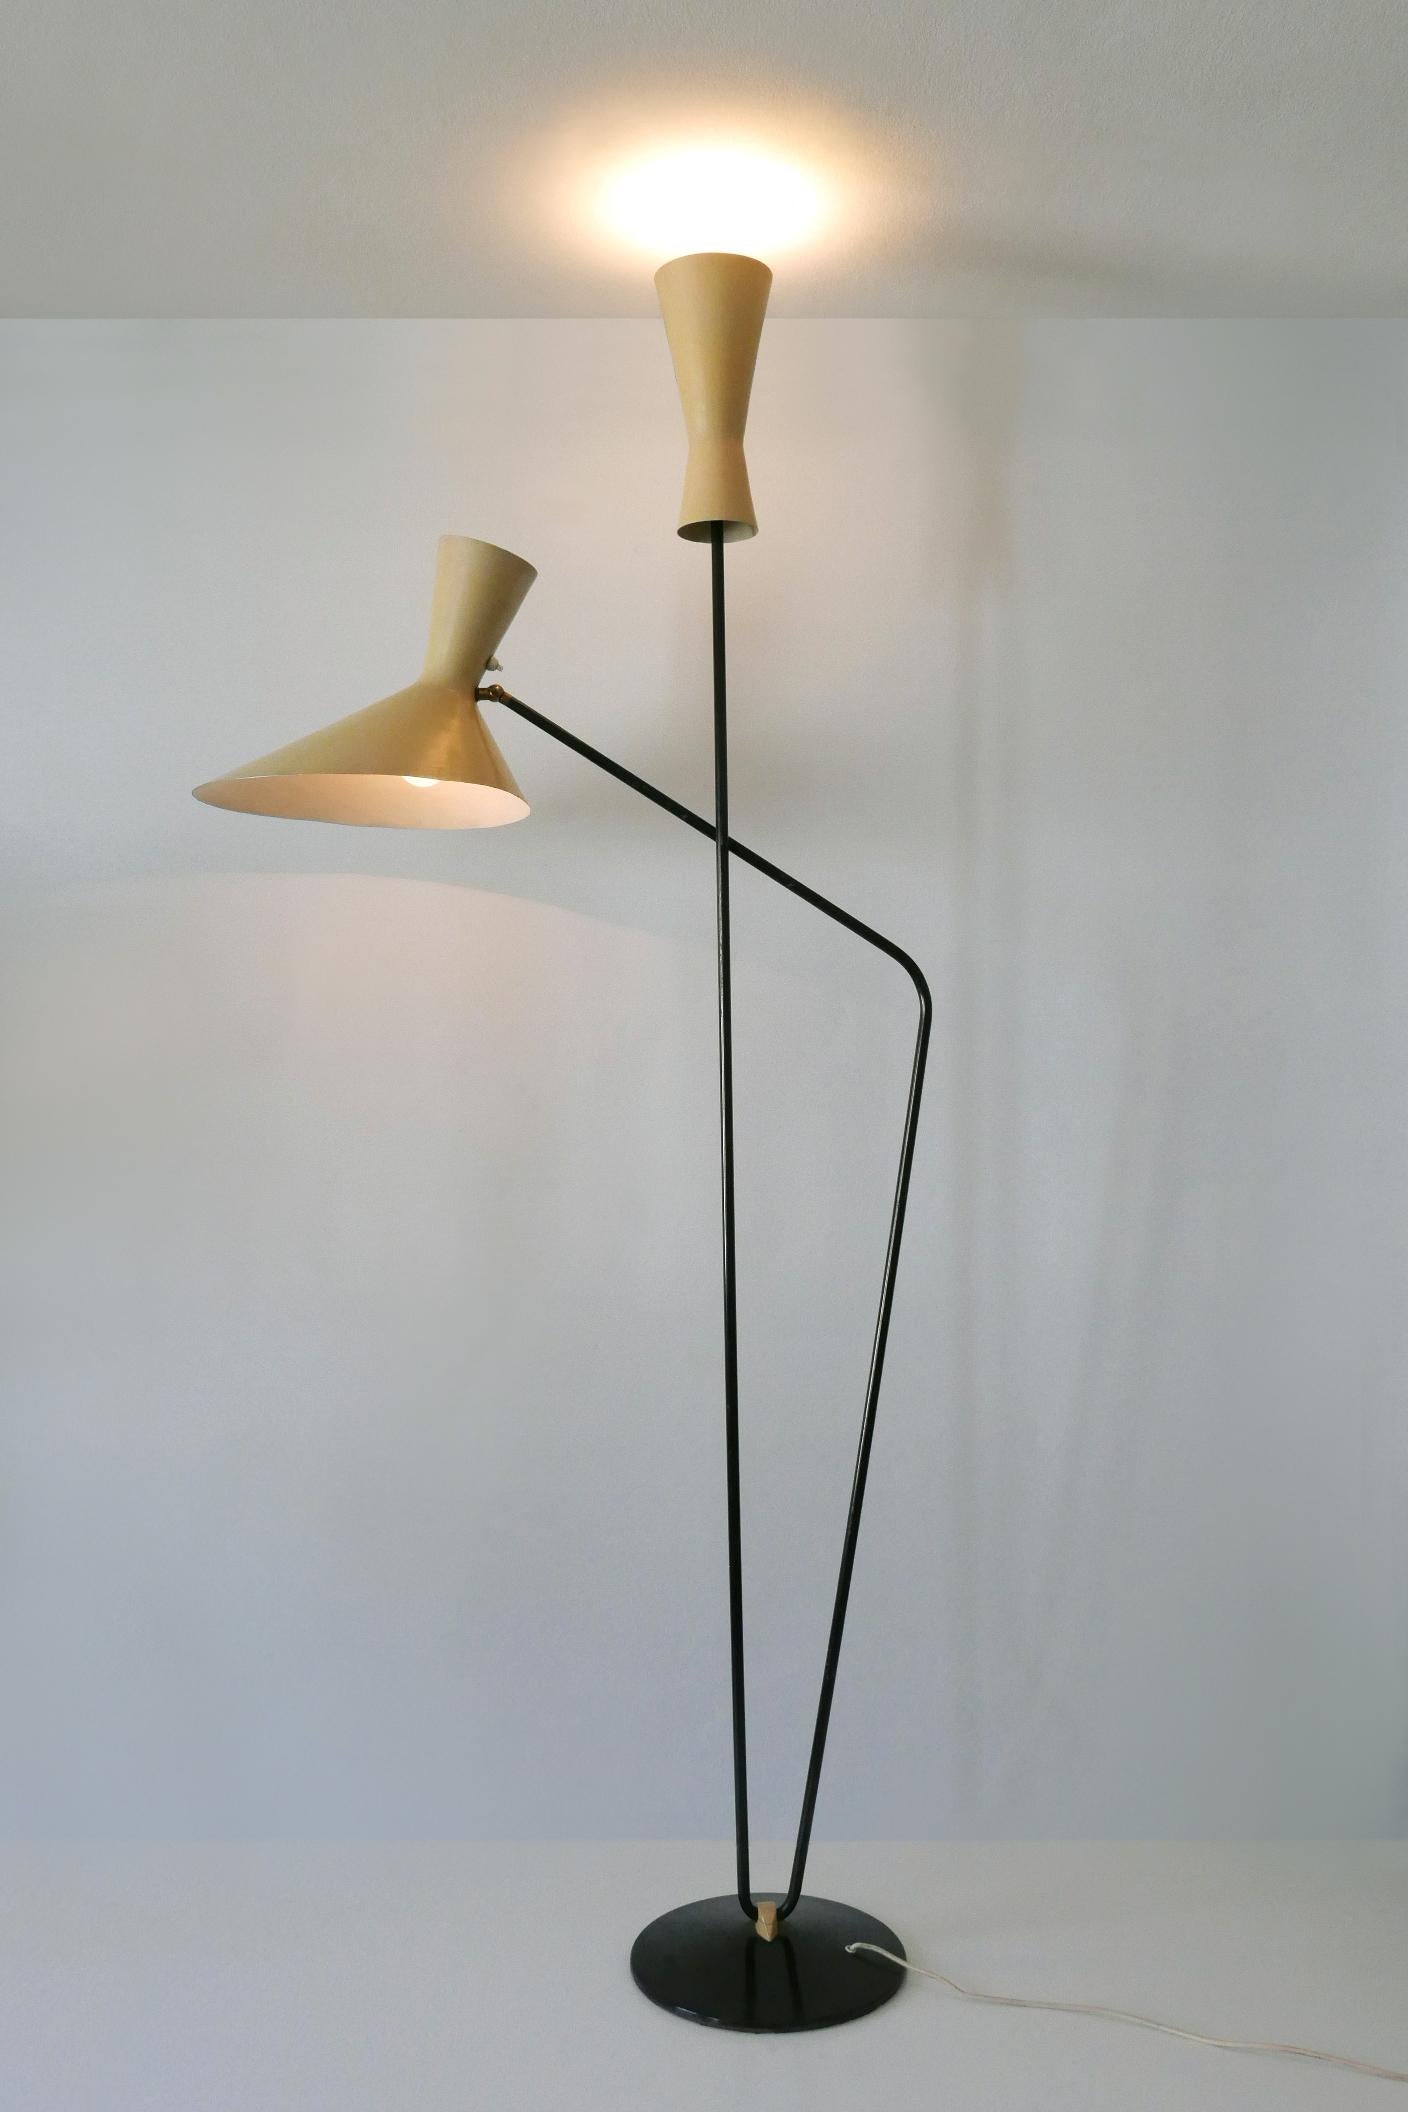 Rare Iconic Mid-Century Modern Floor Lamp by Prof. Carl Moor for BAG Turgi 1950s For Sale 3